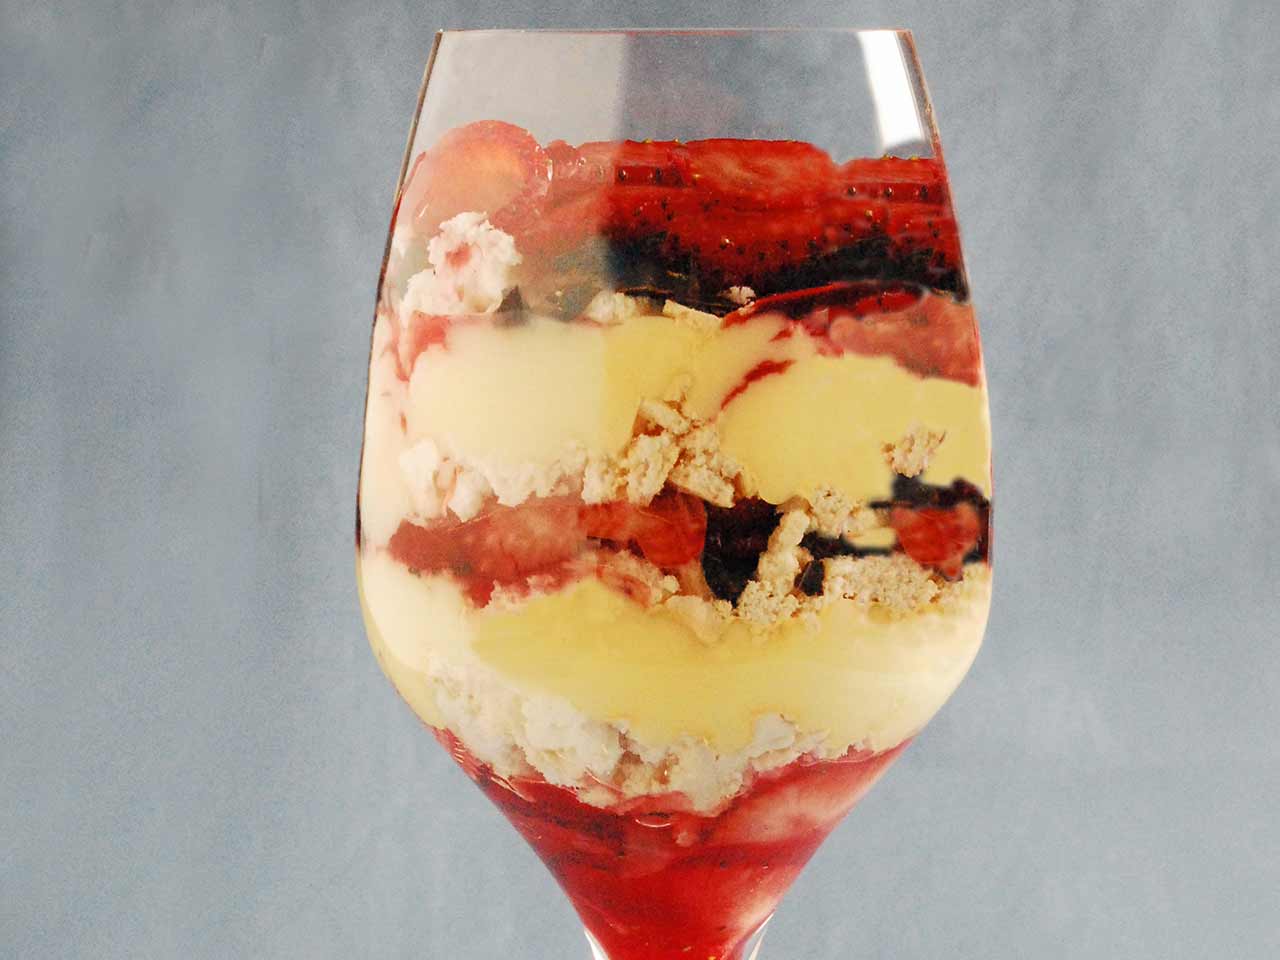 Strawberry and pavlova trifle in a glass